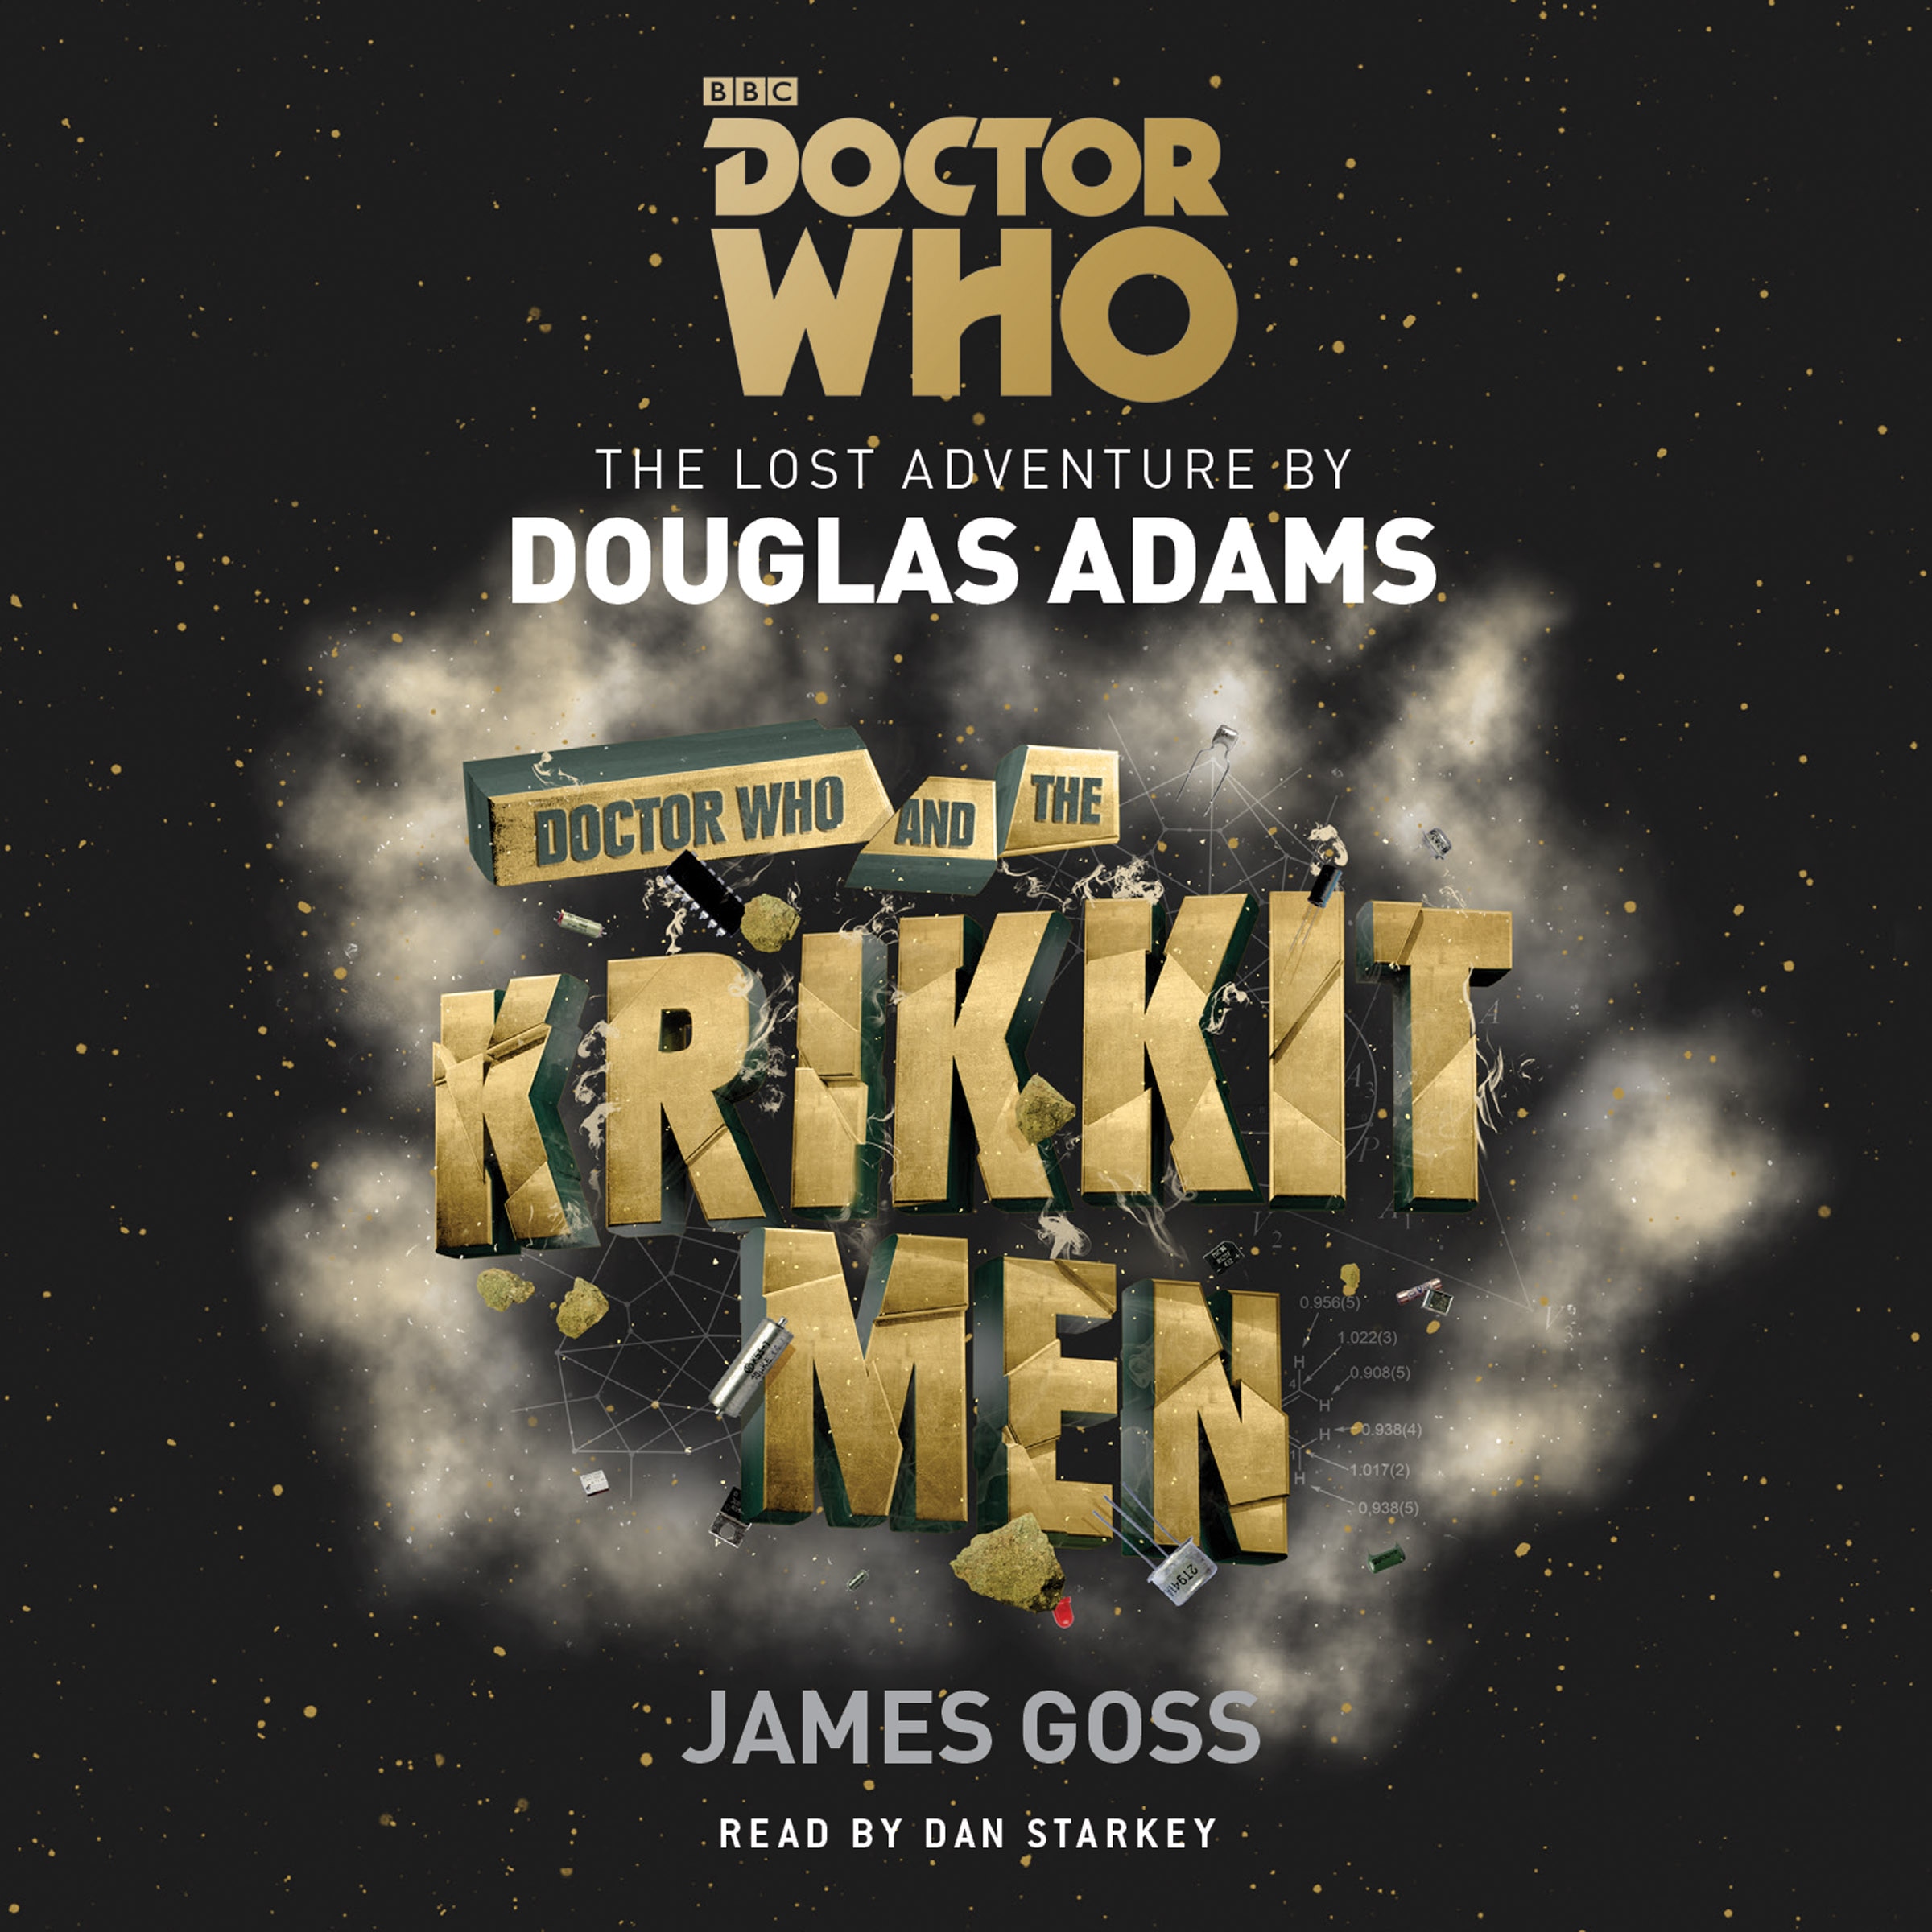 Doctor Who and the Krikkit Men text on front cover